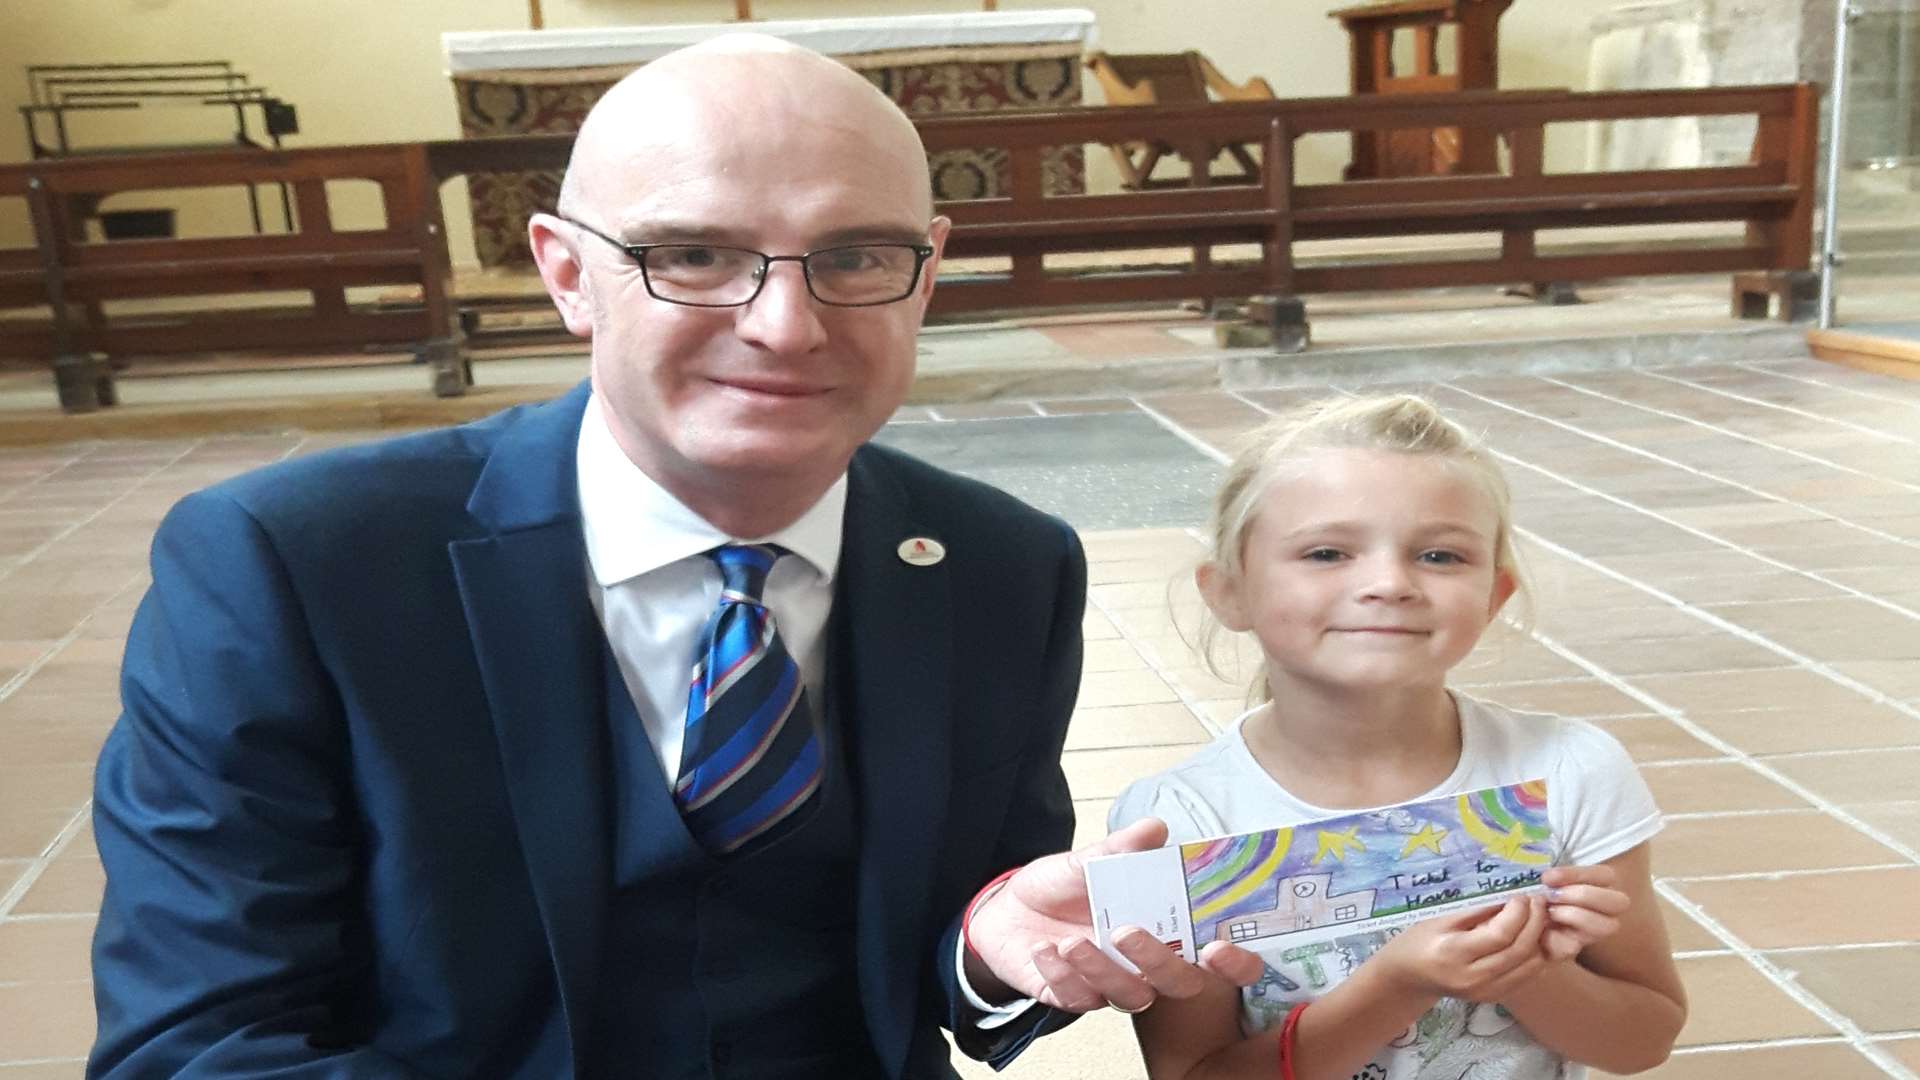 Peter Aiers, a director of the CCT, with seven-year-old Mary Beaman who designed the tour ticket